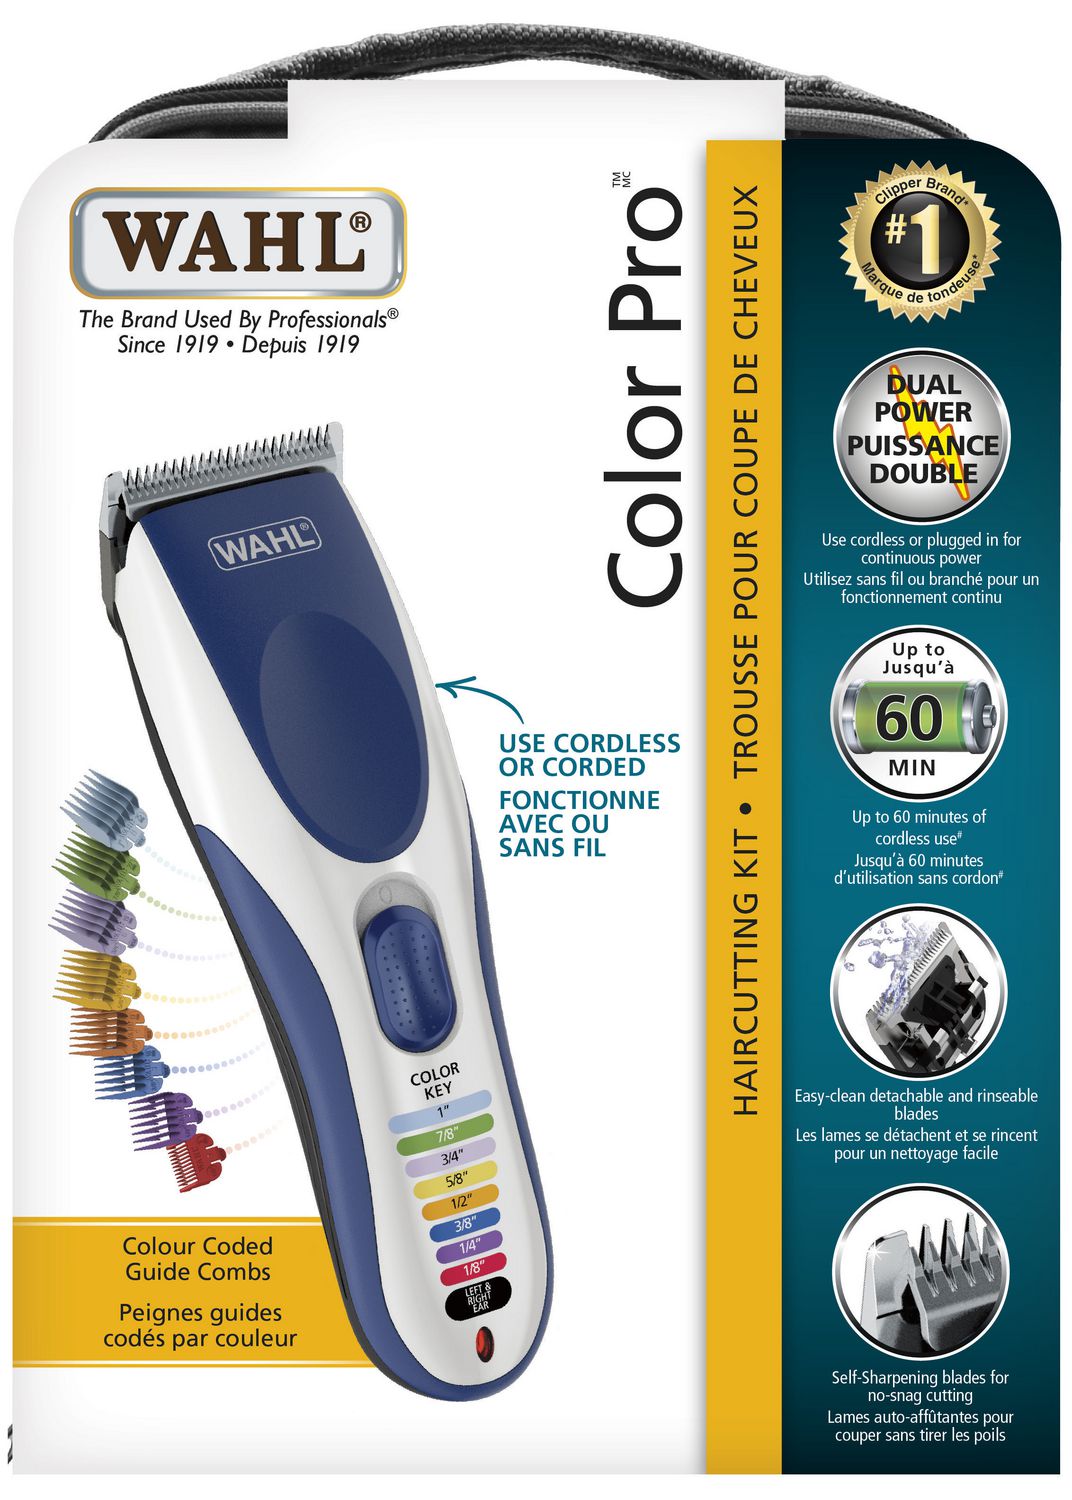 wahl color pro clippers walmart